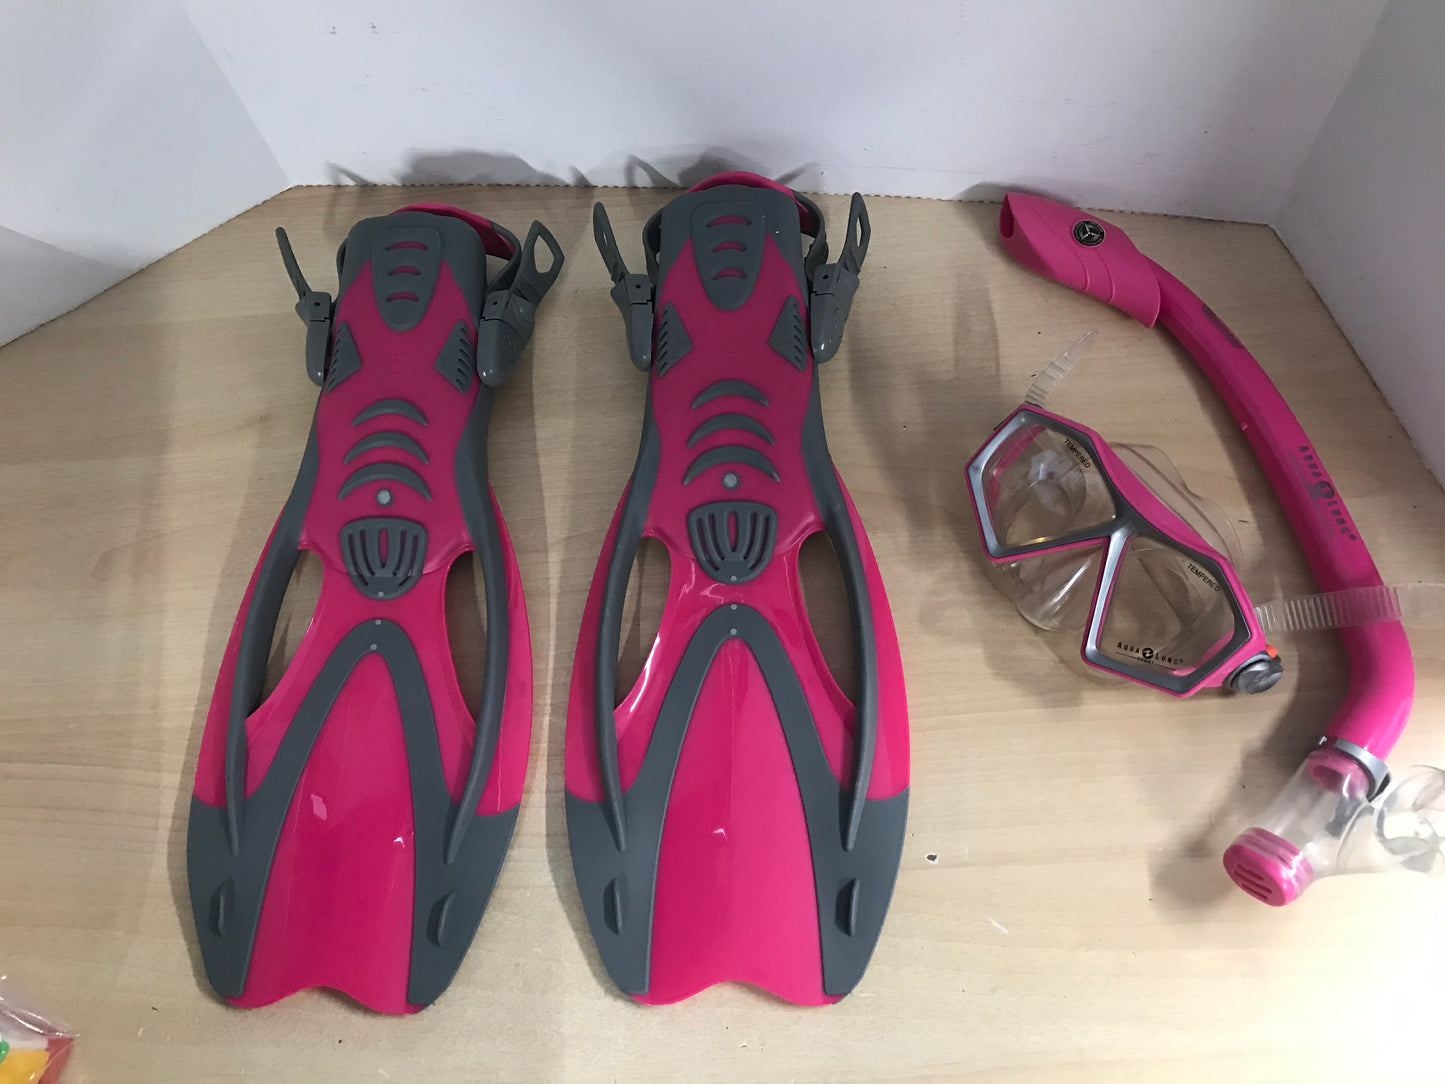 Snorkel Dive Fins Set Child Size 3-6 Shoe Size Youth Aqua Lung Pink and  Grey As New